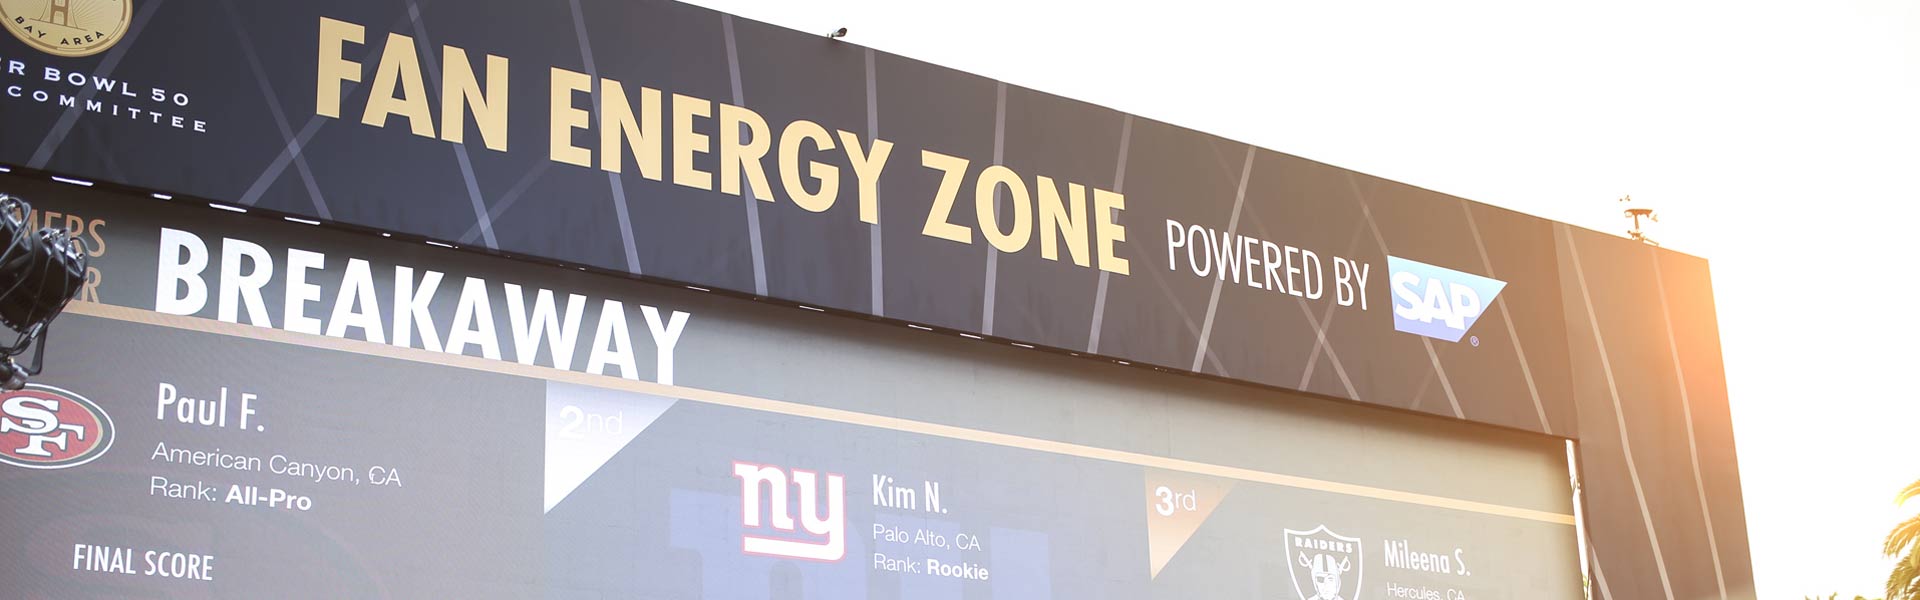 Designing an Engaging Fan Experience at Super Bowl 50